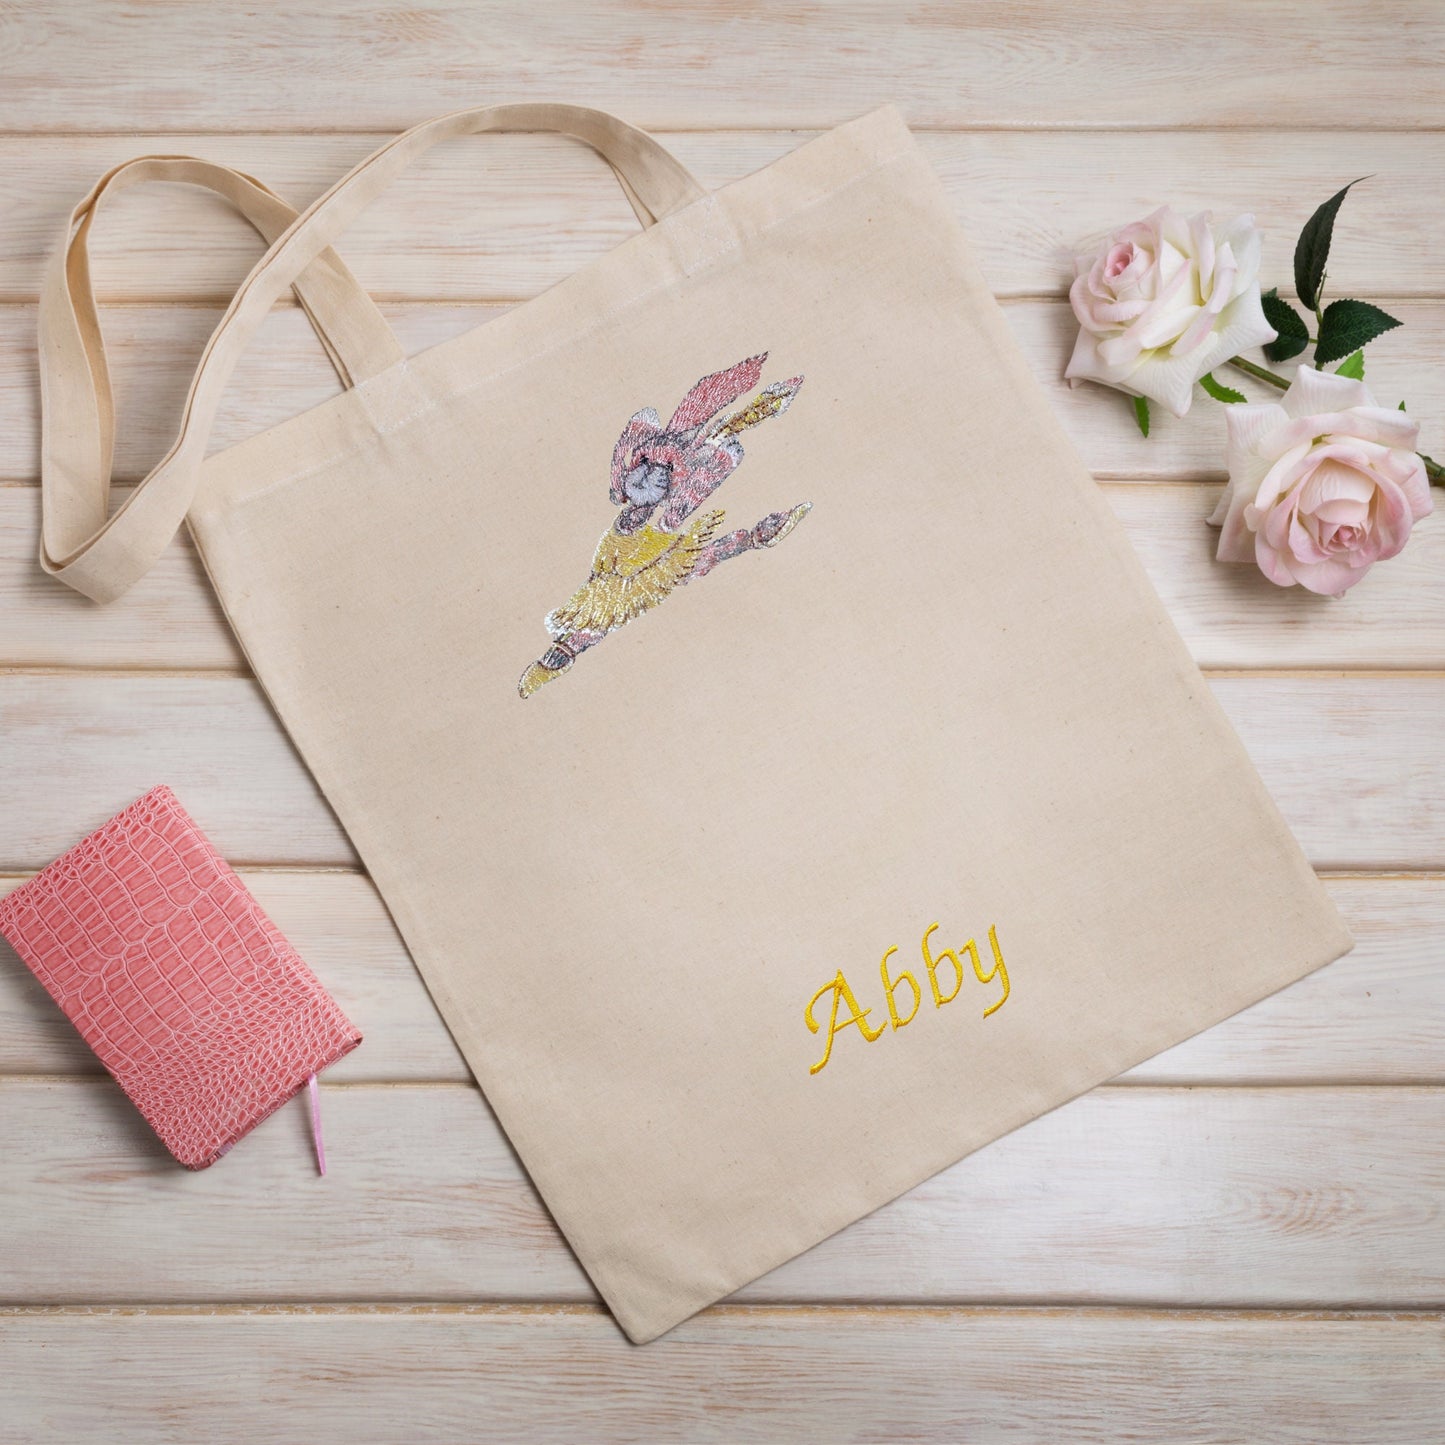 Personalised Ballet Shoe Tote Bag, Embroidered Ballerina Bunny Shoe Storage Bag for Kids, Lightweight and Eco-friendly Ballet Gift for Her